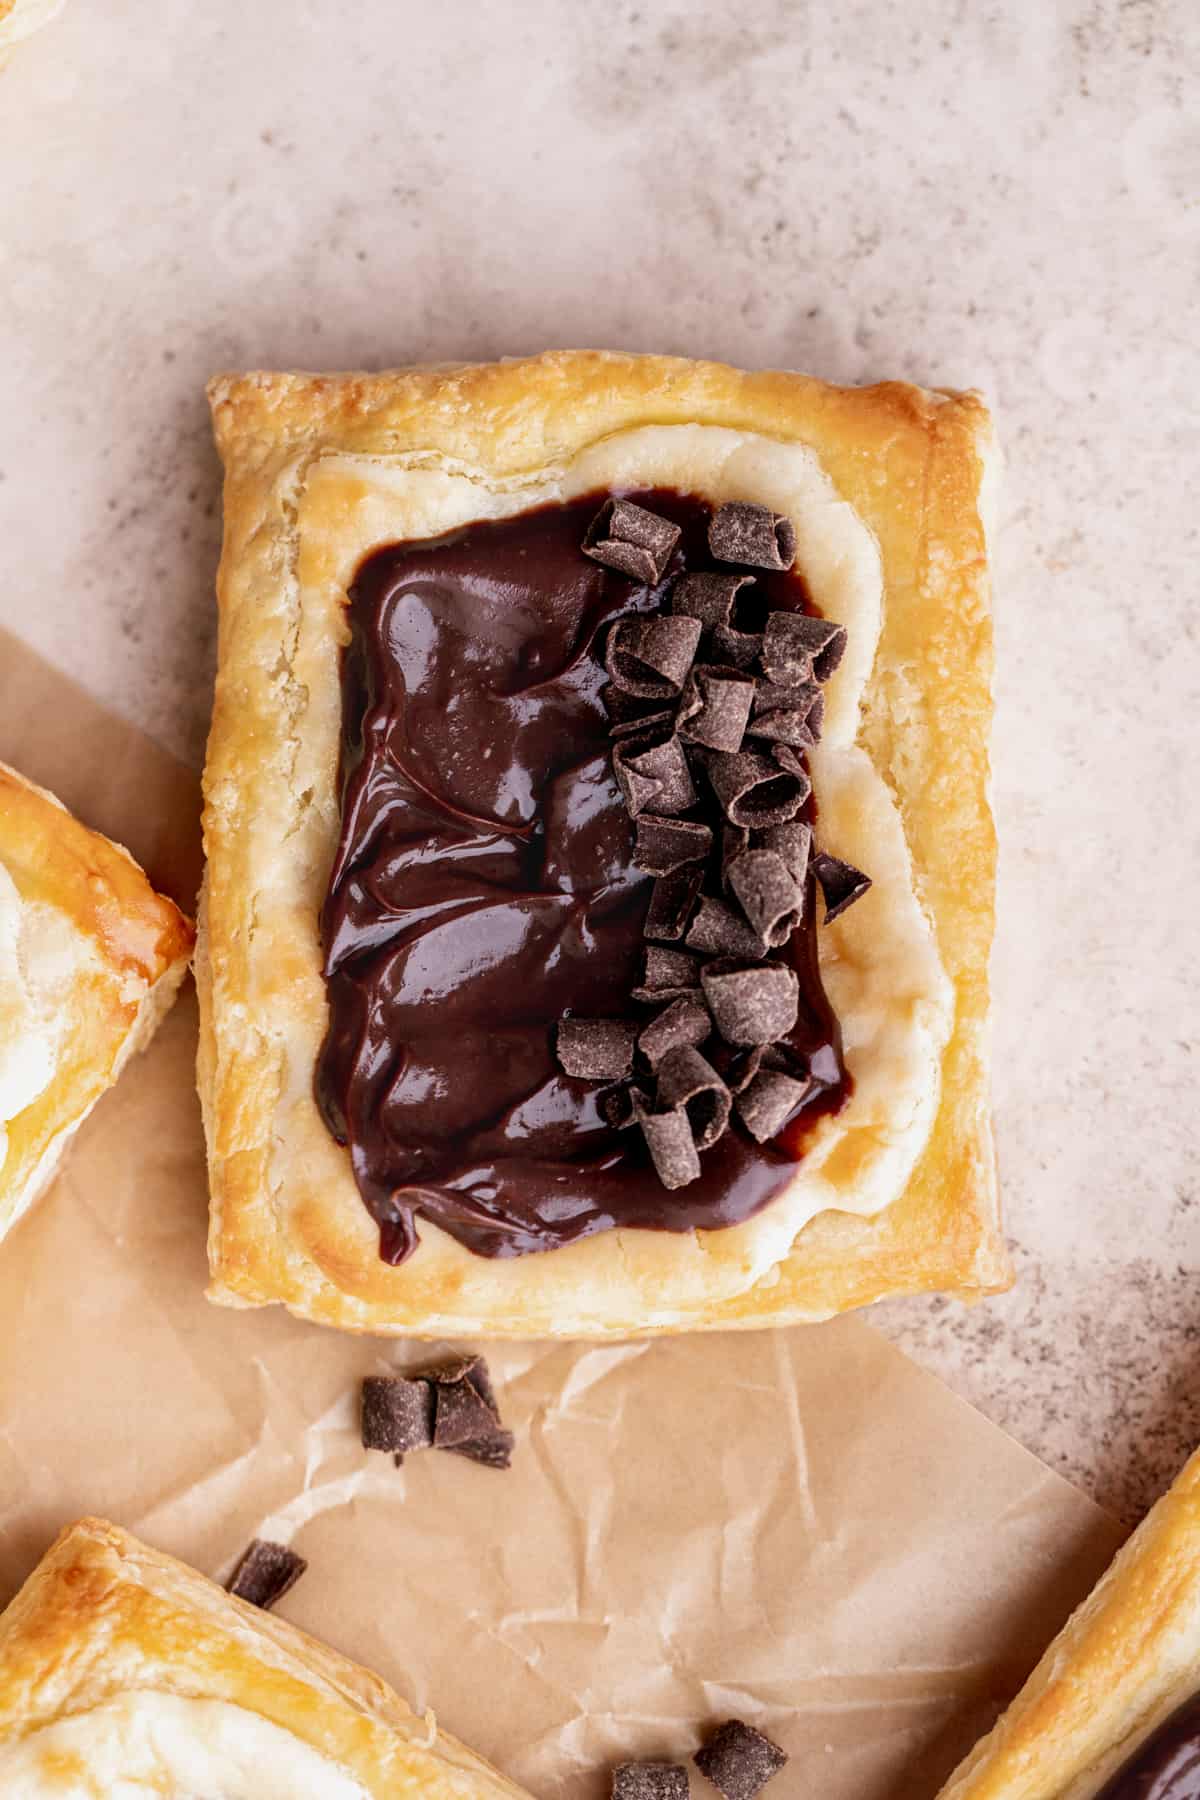 Pastry with chocolate curls on top.